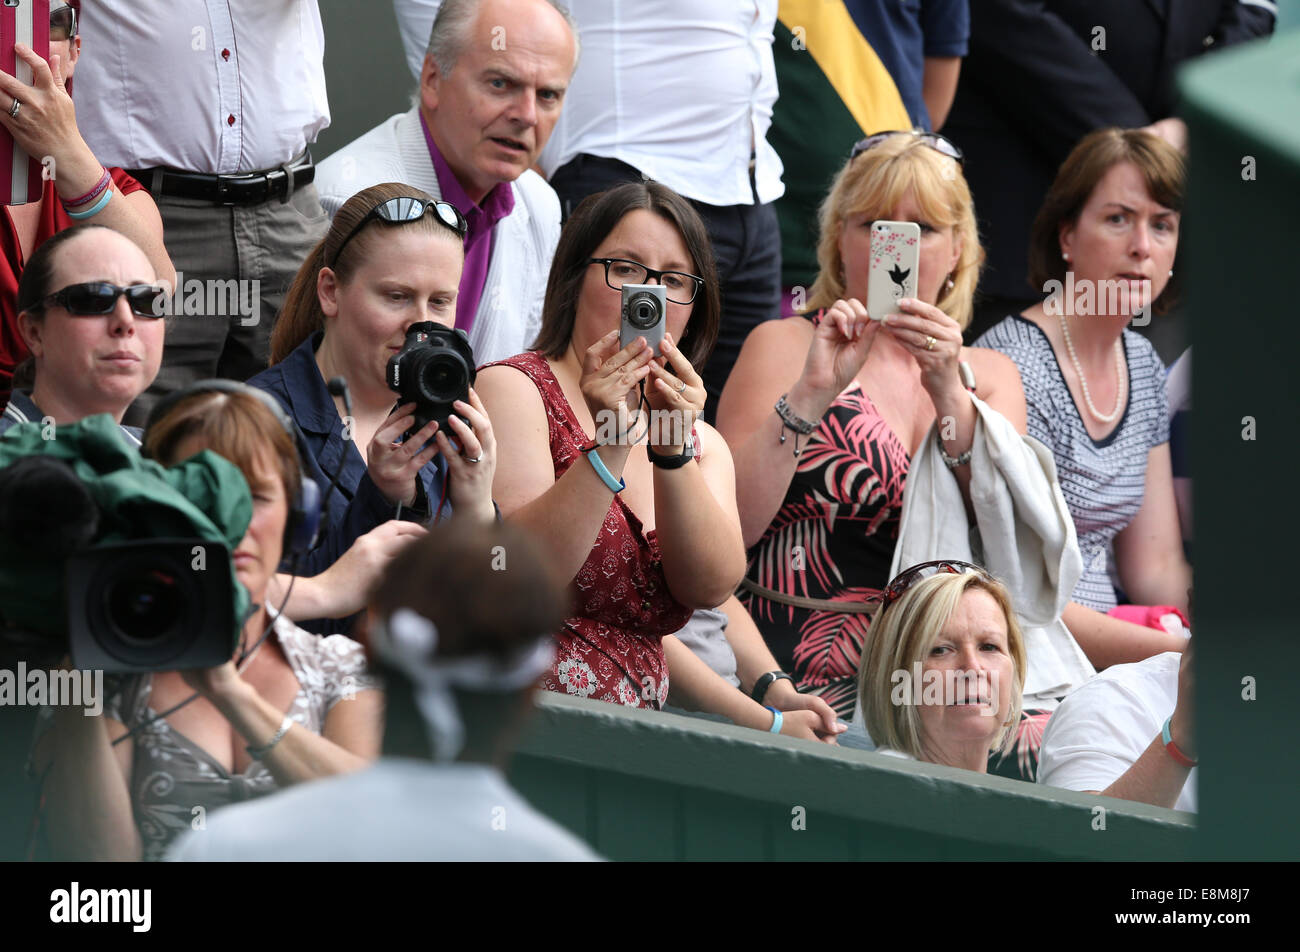 Female fans taking a photo of a player at Wimbledon Championships 2014, Stock Photo